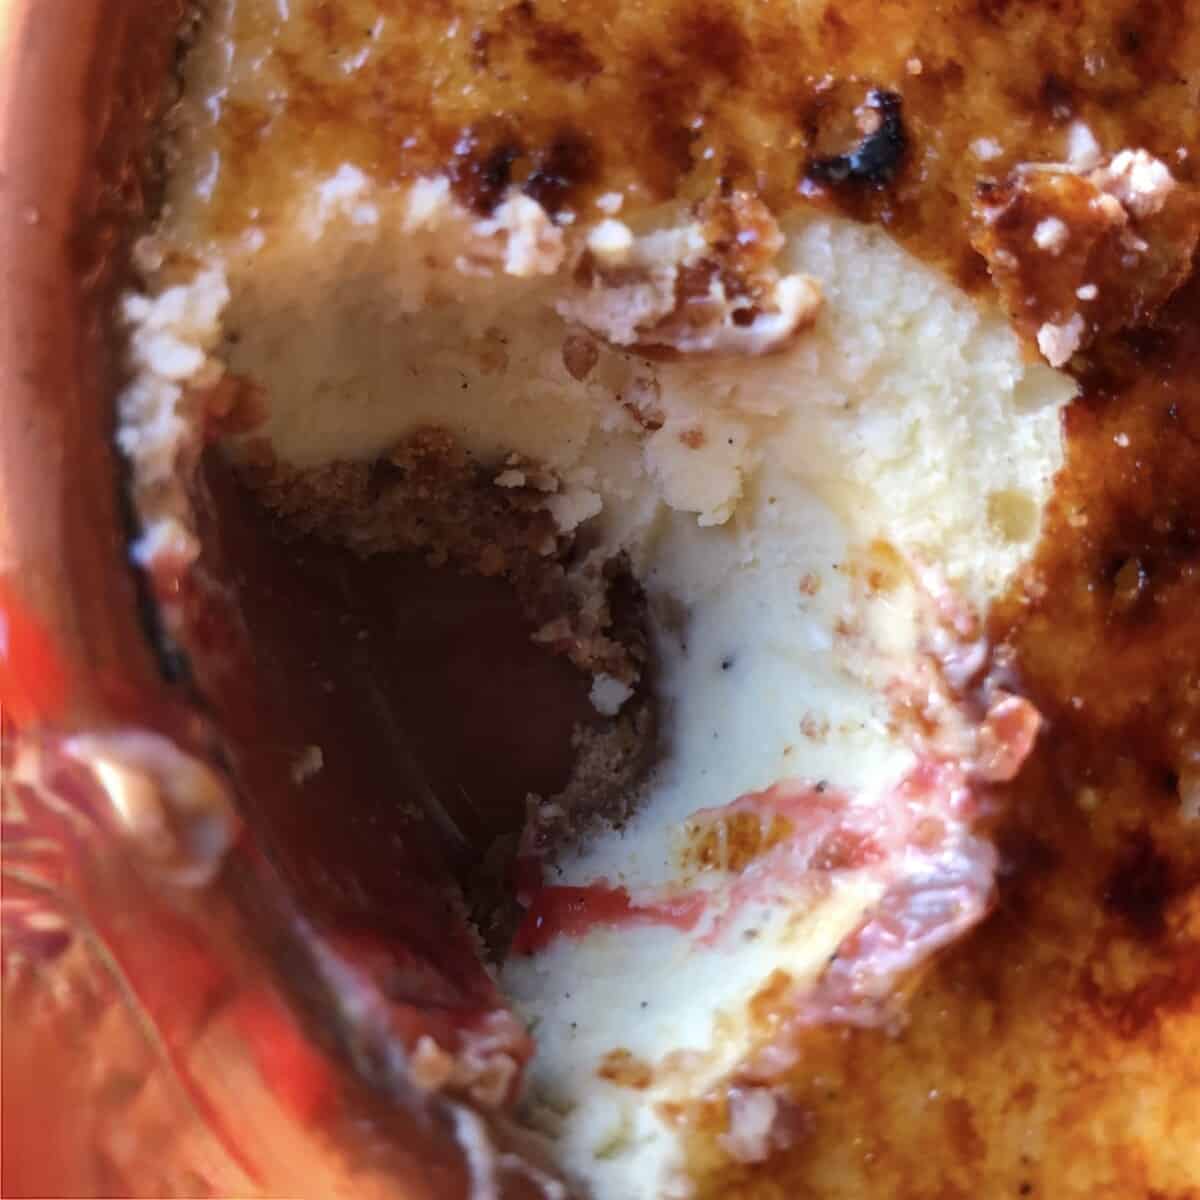 a missing hole where the cheesecake has been removed and eaten revealing the vanilla bean speckled white cheesecake and Biscoff crust